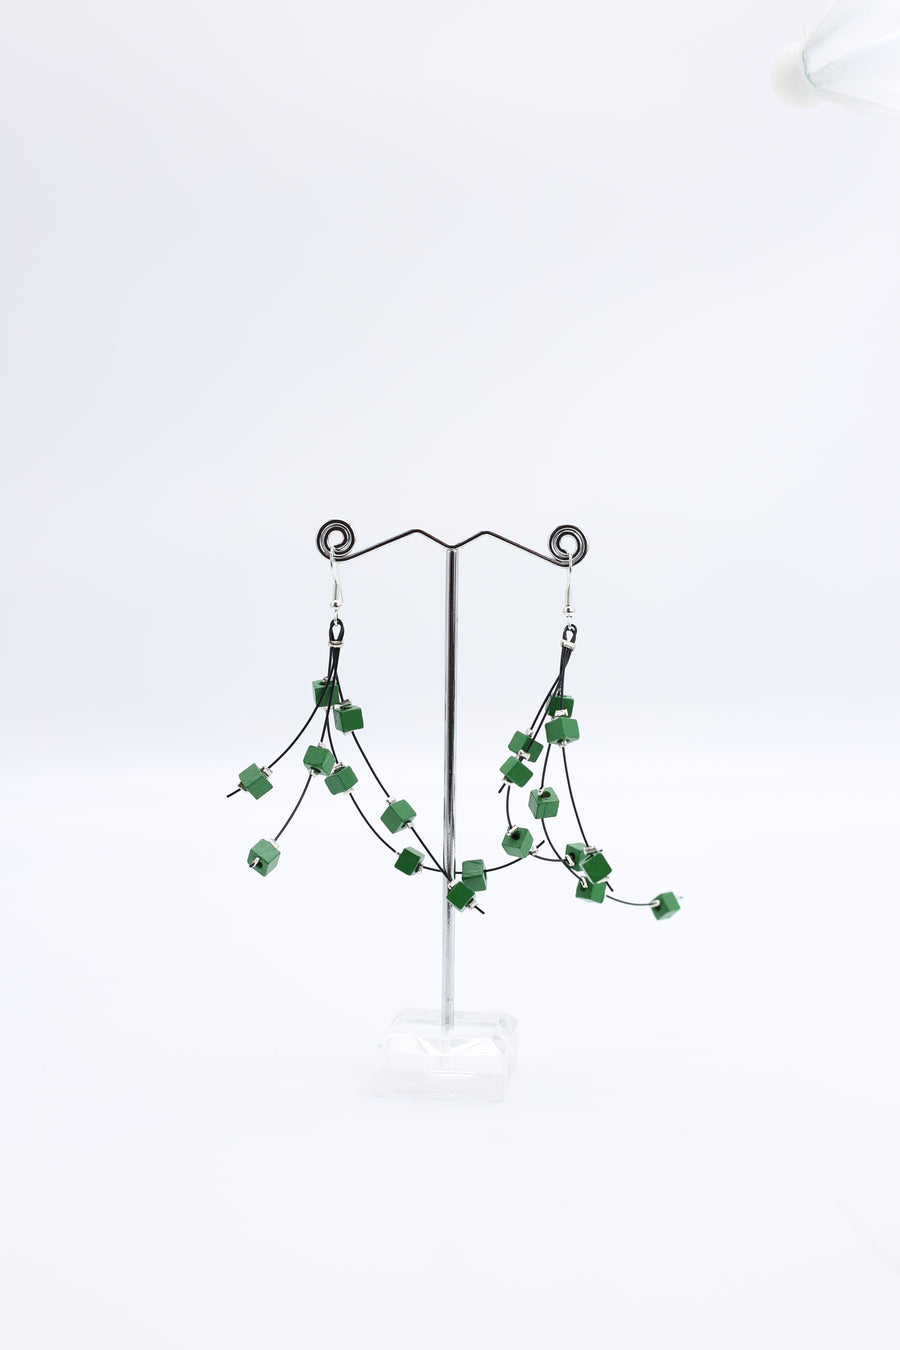 Frankie Pashmina Beads on Fishwire Earrings - Spring Green